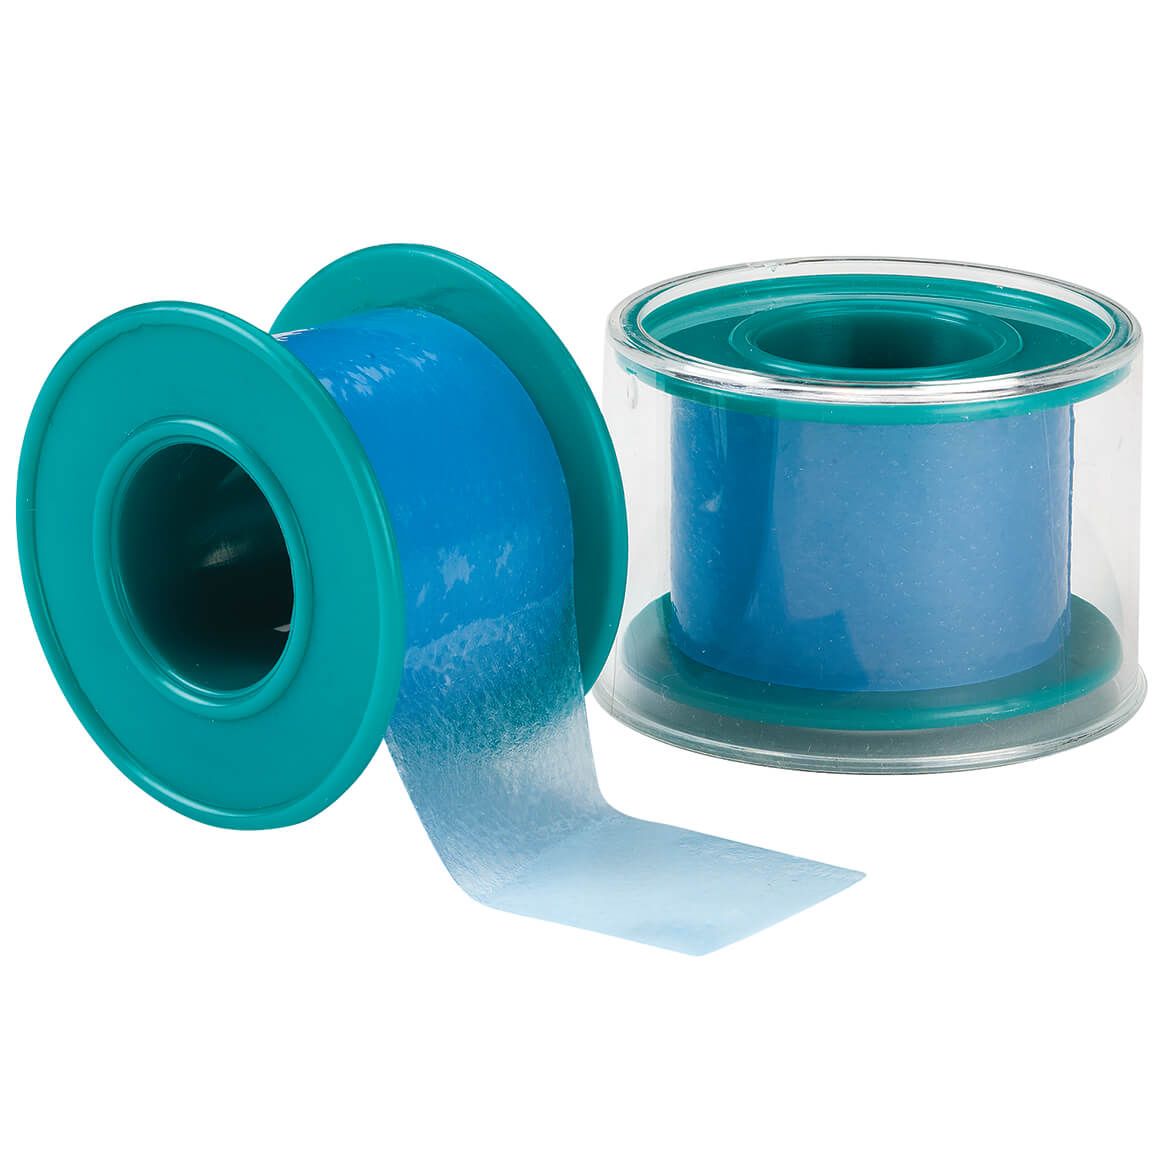 Medical Grade Silicone Tape, Set of 2 + '-' + 374515